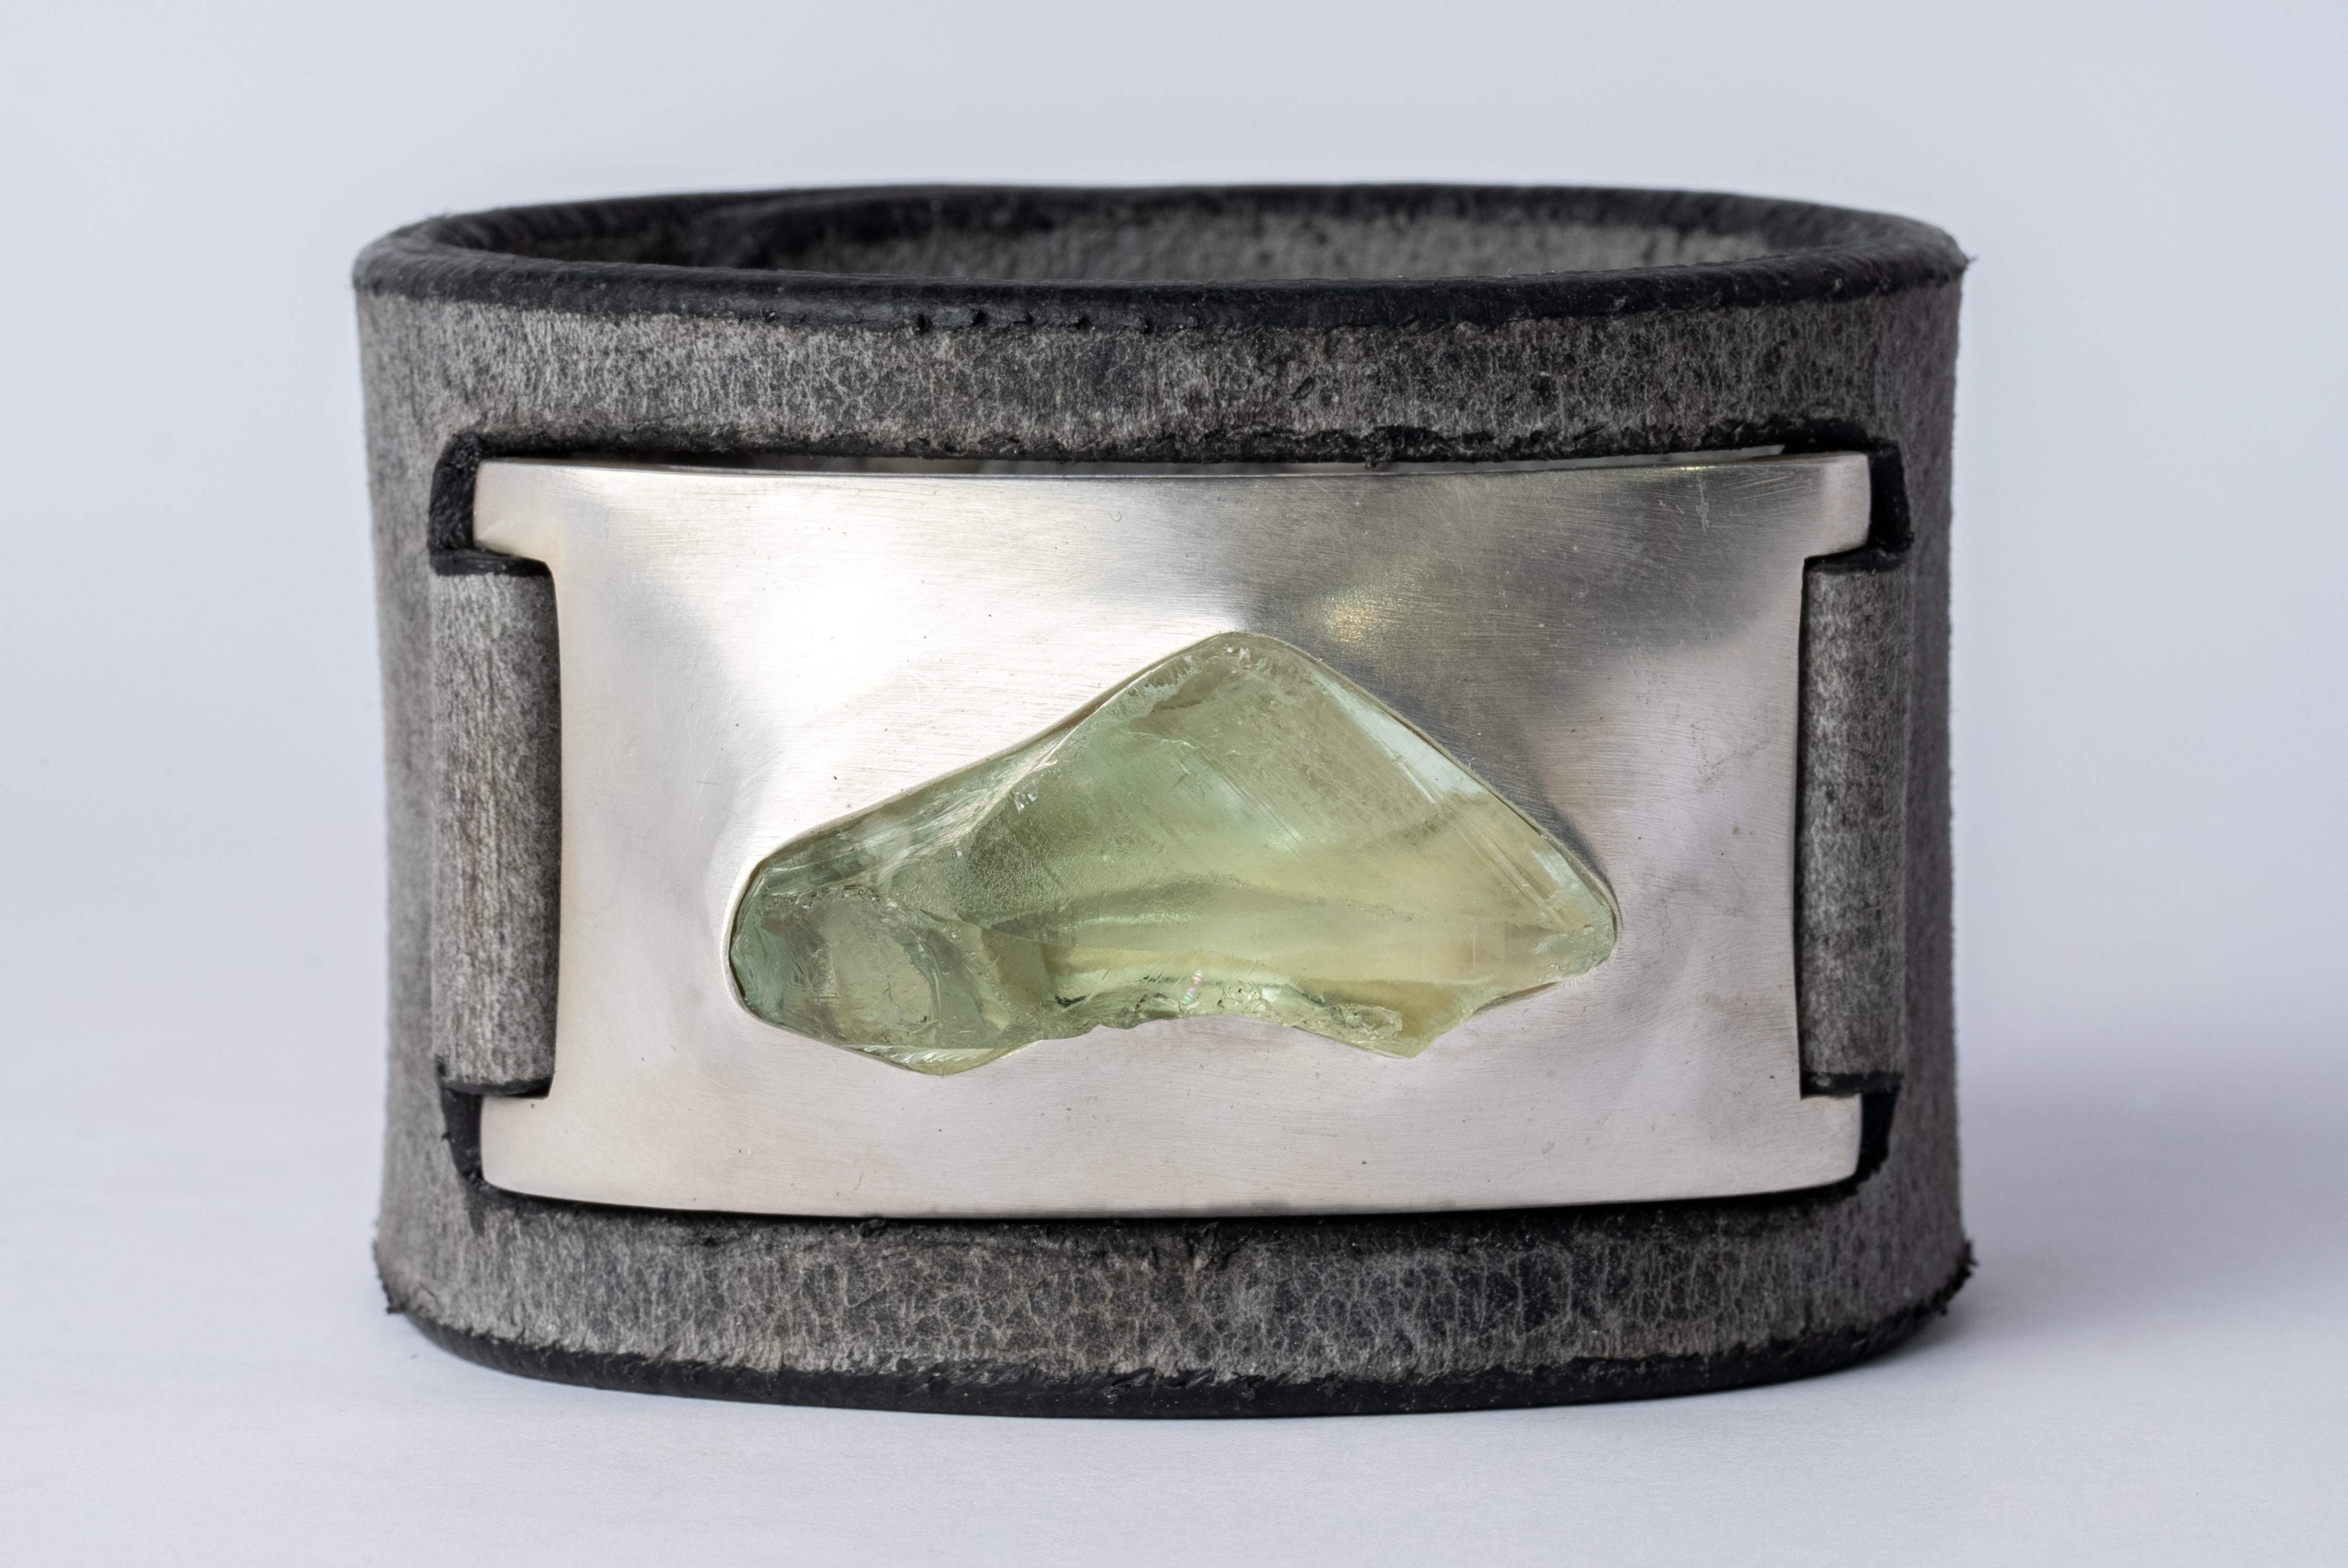 Bracelet in acid treated silver plated brass, green amethyst, and grey shingles leather. This item is made with a naturally occurring element and will vary from the photograph you see. Each piece is unique and this is what makes it special.
Bracelet